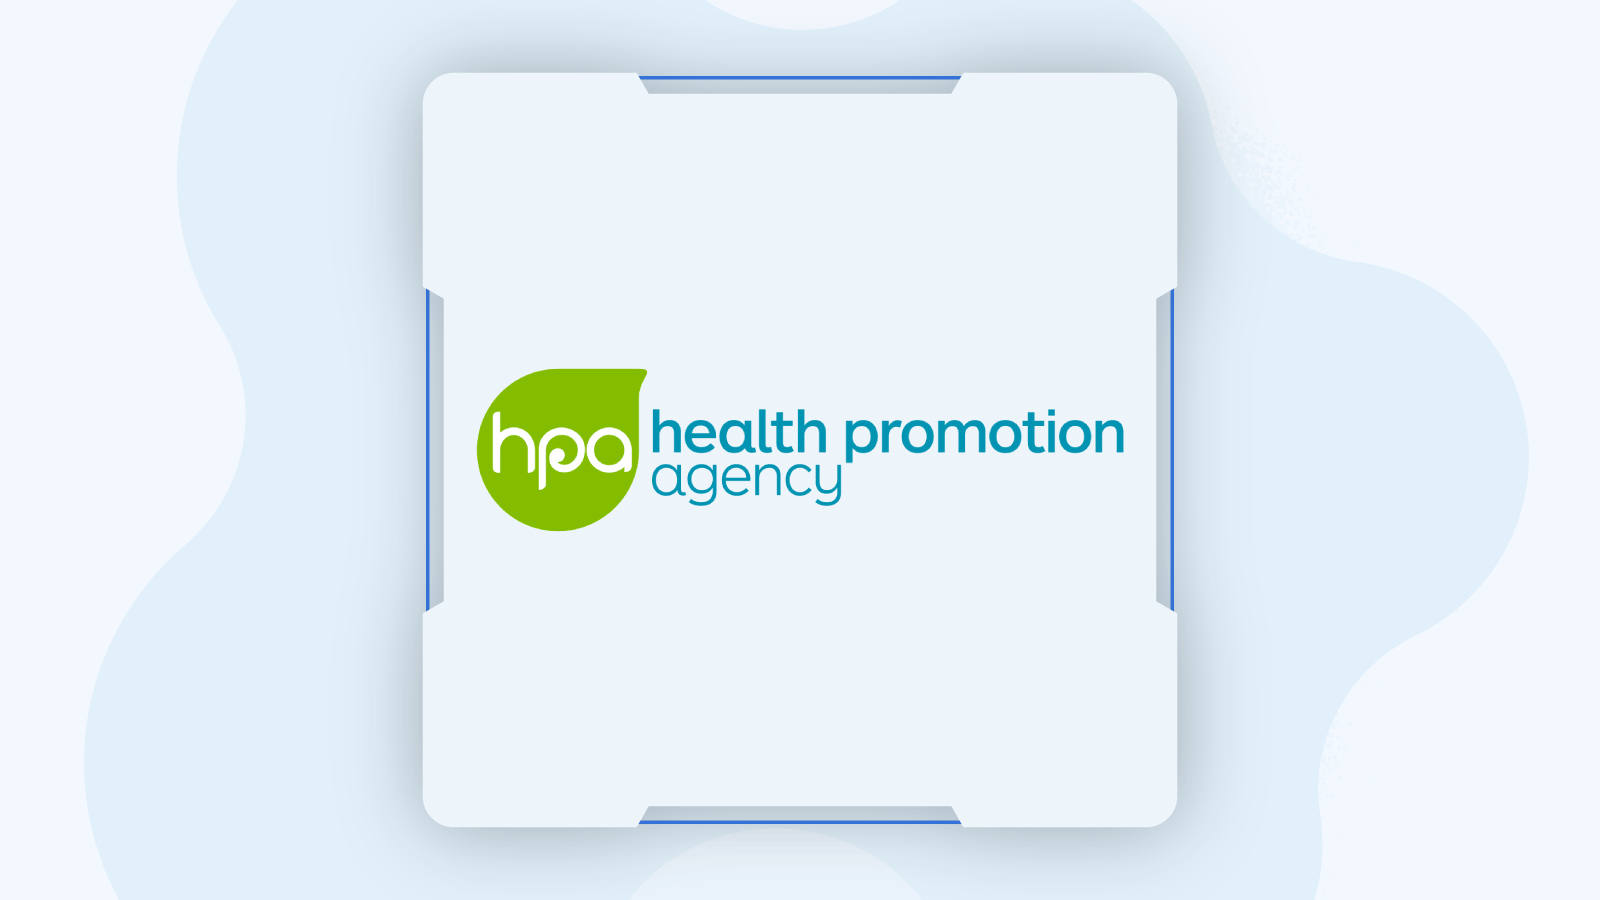 The Health Promotion Agency